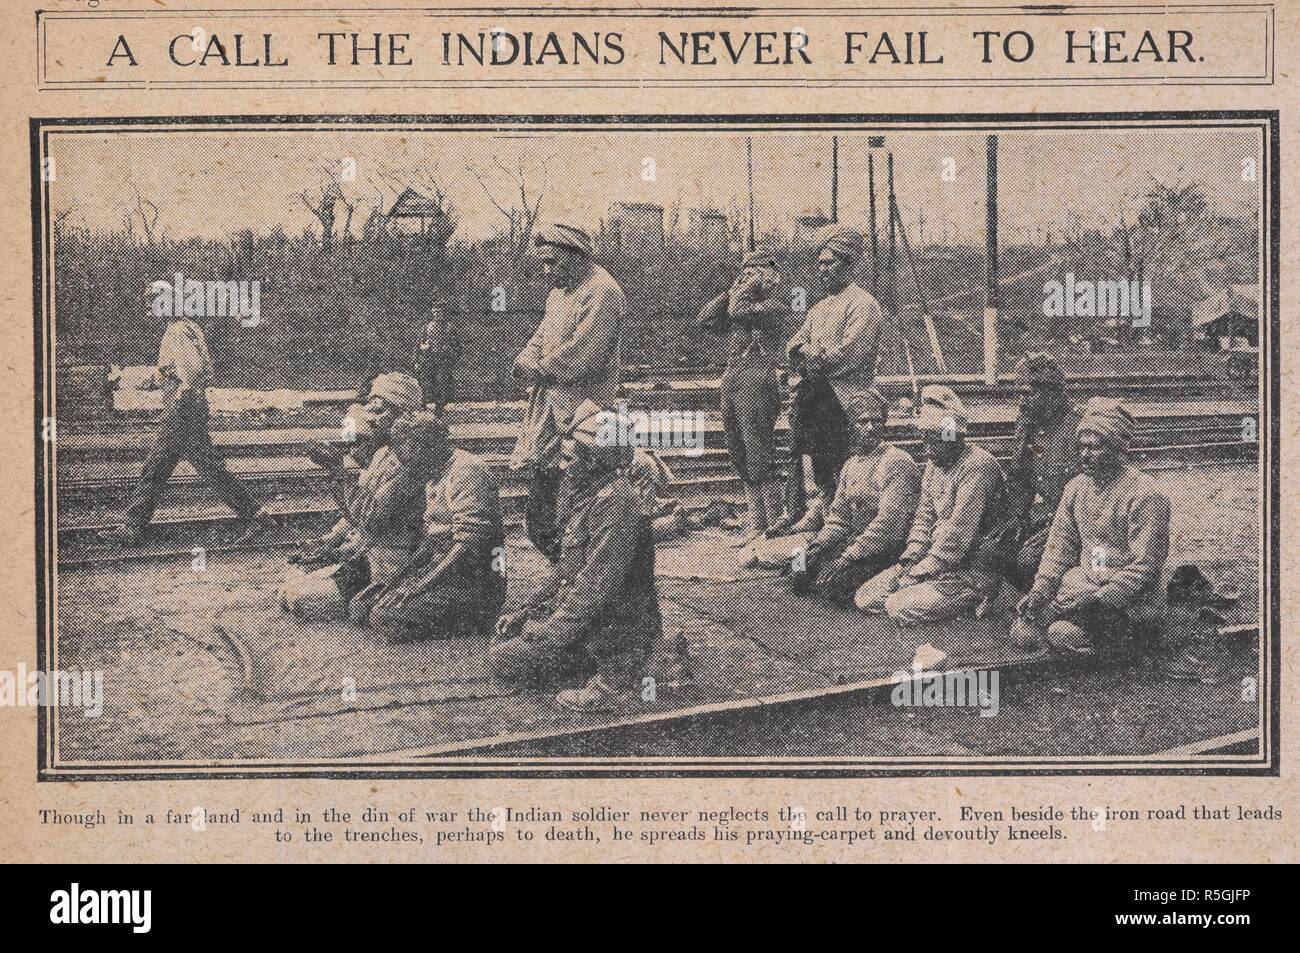 'A call the Indians never fail to hear'. Indian soldiers praying, during the First World War. Daily Sketch. London, 1915. Source: Daily Sketch, 22 September 1915, page 6. Stock Photo